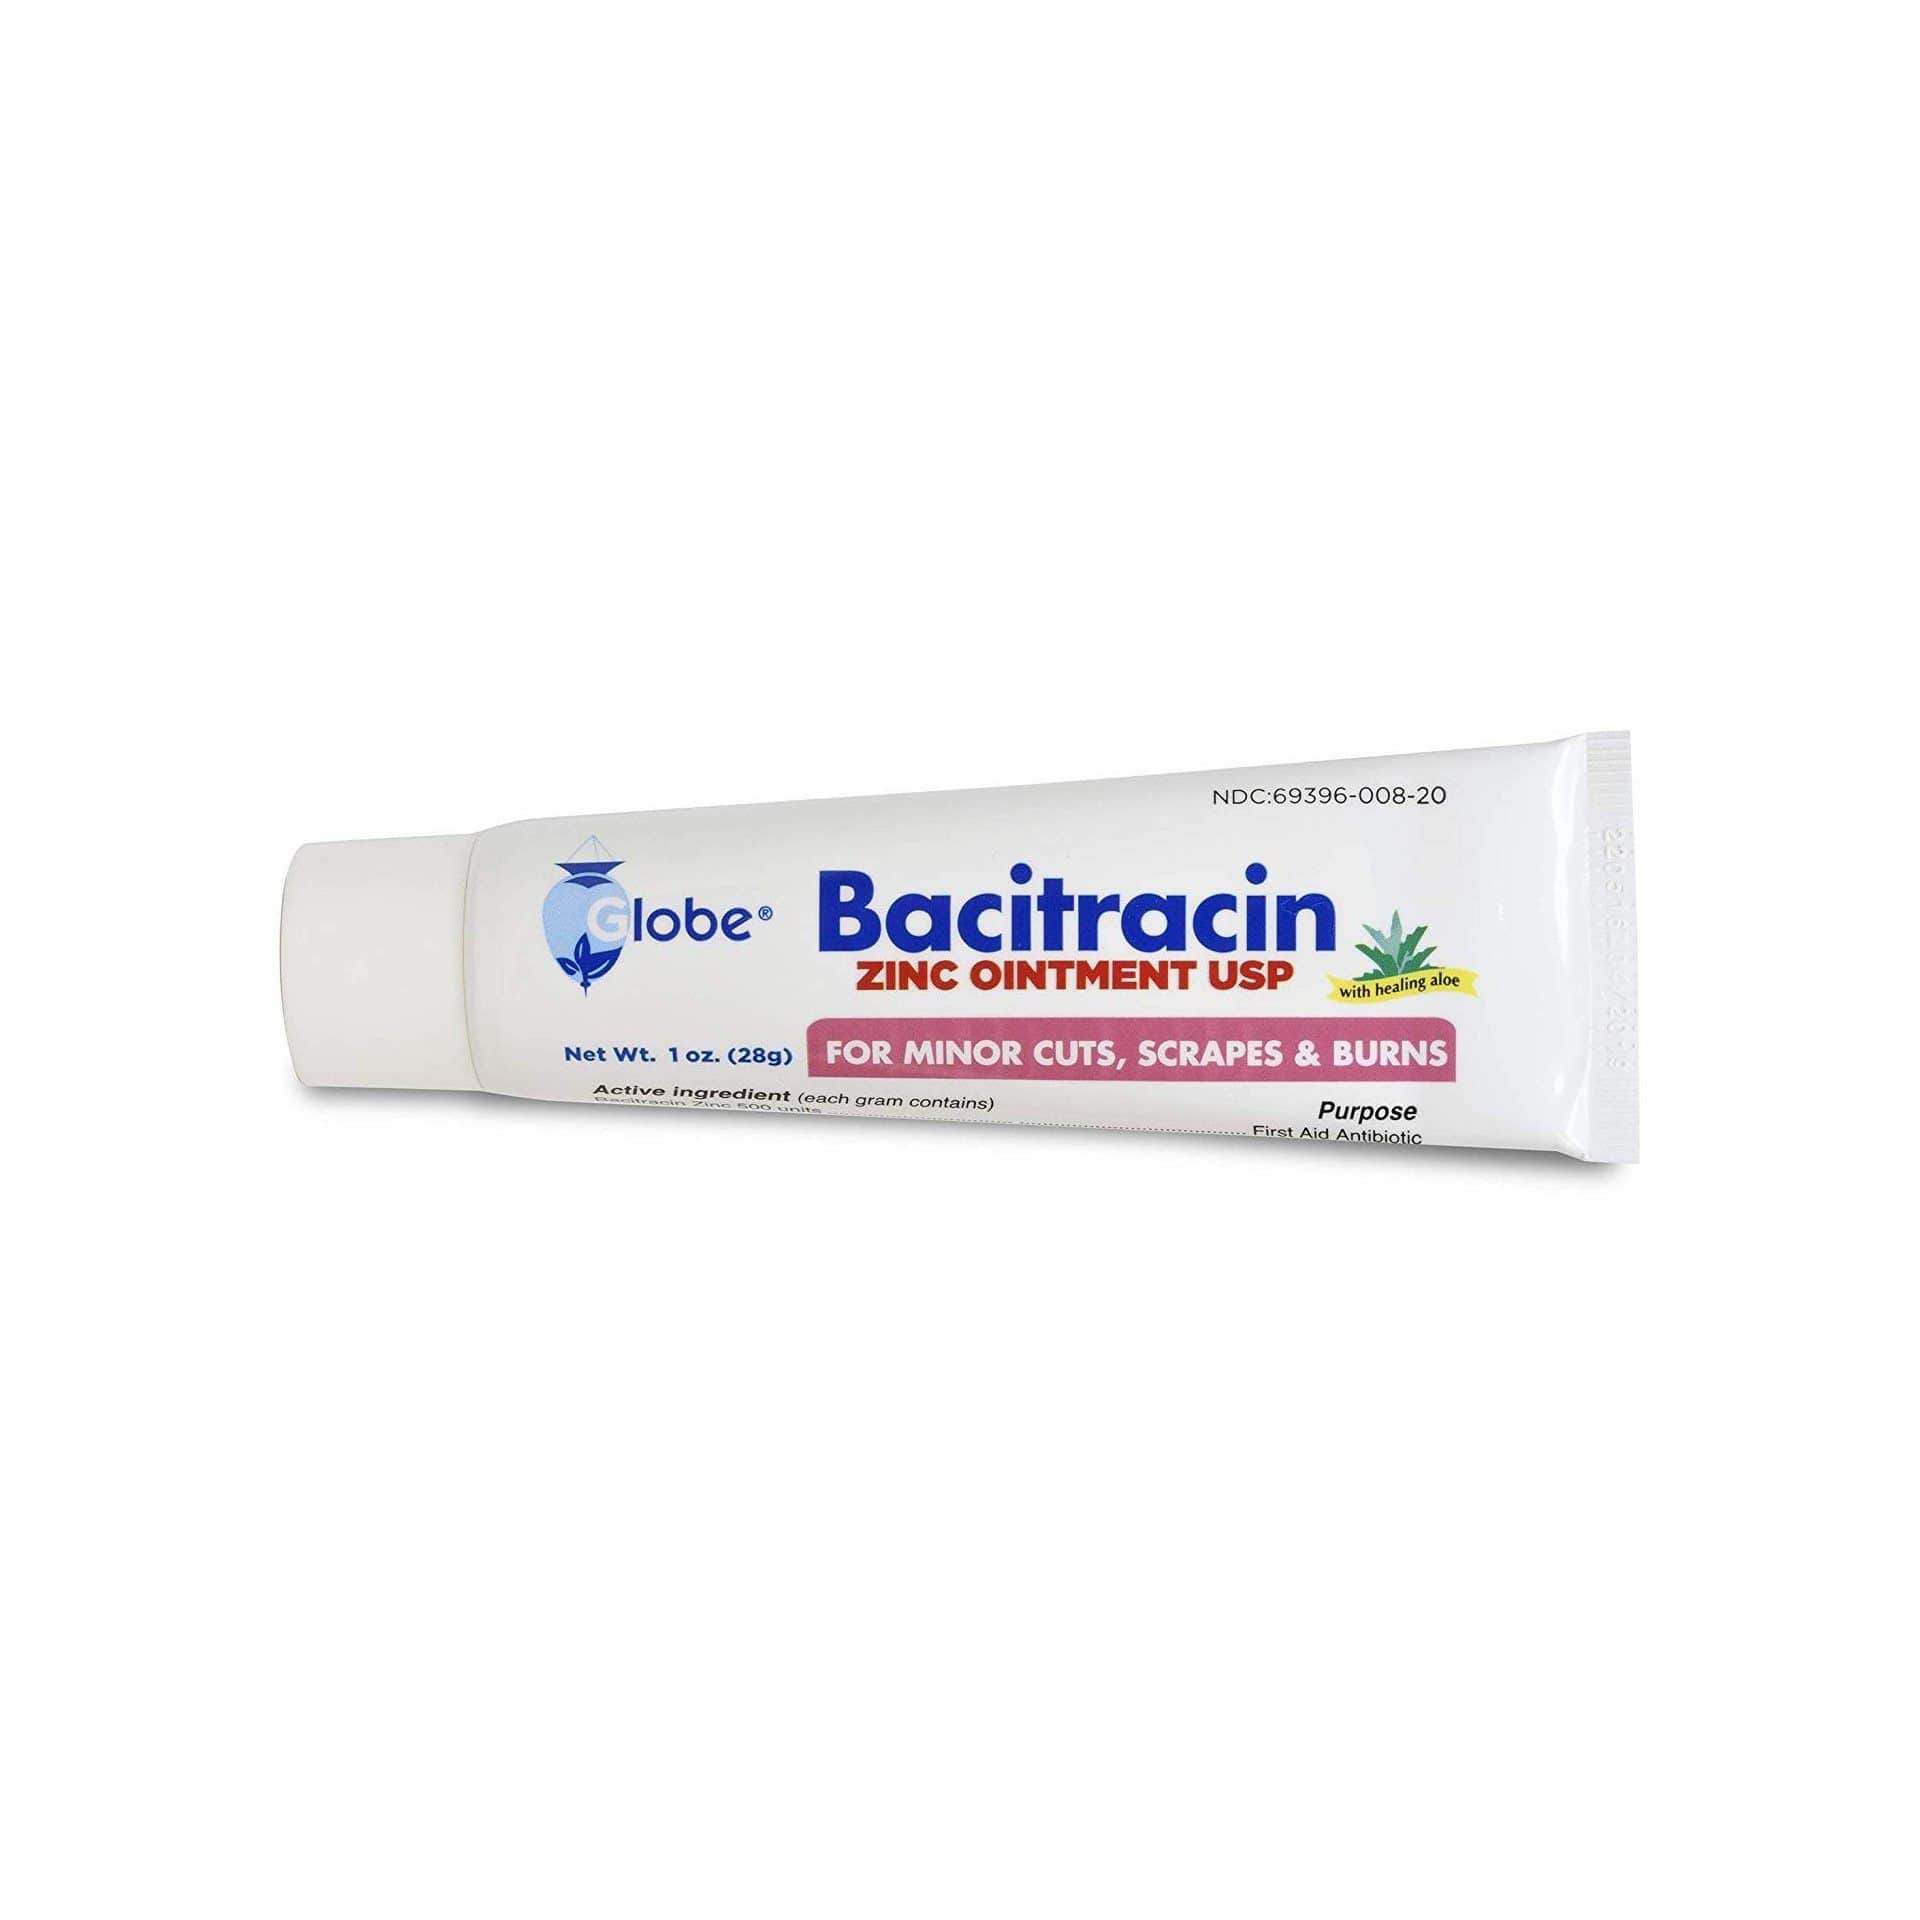 Bacitracin - First Aid Antibiotic Ointment